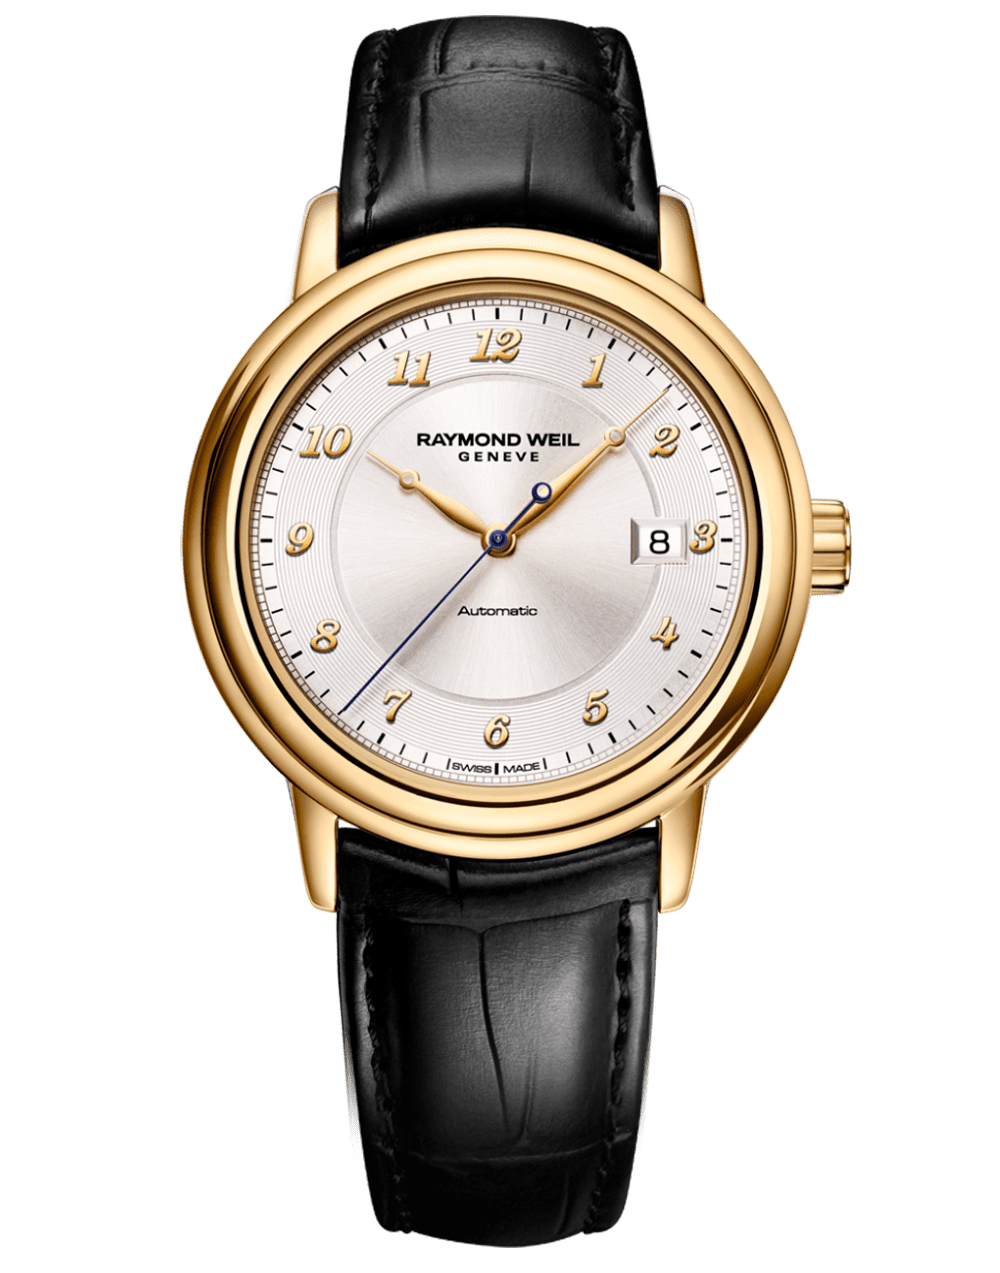 Introducing: The New Raymond Weil Freelancer 2790 Collection